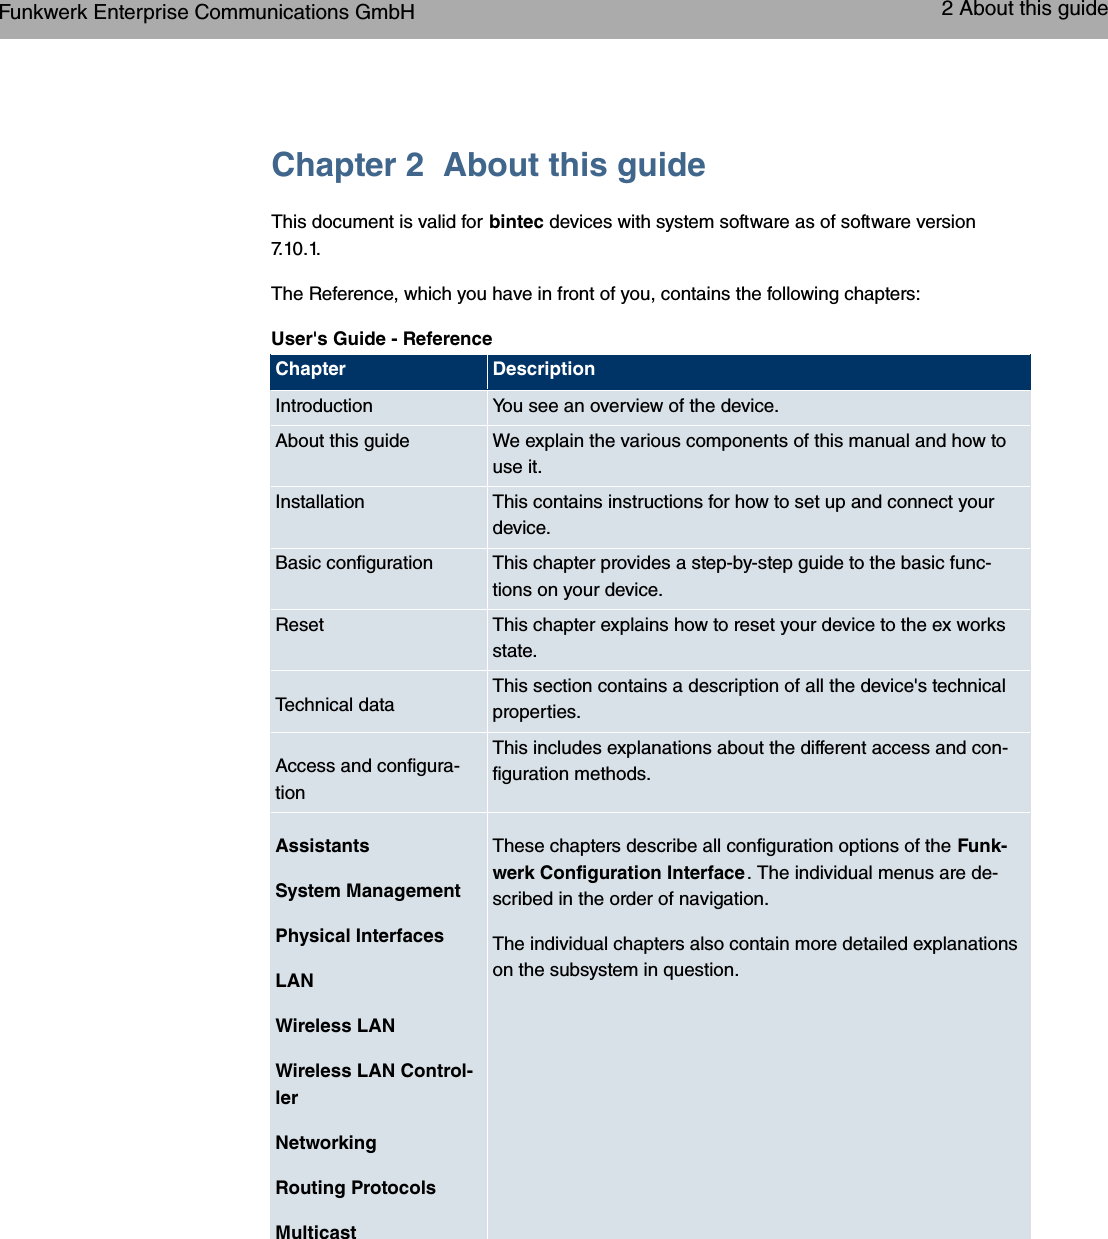 Chapter 2 About this guideThis document is valid for bintec devices with system software as of software version7.10.1.The Reference, which you have in front of you, contains the following chapters:User&apos;s Guide - ReferenceChapter DescriptionIntroduction You see an overview of the device.About this guide We explain the various components of this manual and how touse it.Installation This contains instructions for how to set up and connect yourdevice.Basic configuration This chapter provides a step-by-step guide to the basic func-tions on your device.Reset This chapter explains how to reset your device to the ex worksstate.Technical dataThis section contains a description of all the device&apos;s technicalproperties.Access and configura-tionThis includes explanations about the different access and con-figuration methods.AssistantsSystem ManagementPhysical InterfacesLANWireless LANWireless LAN Control-lerNetworkingRouting ProtocolsMulticastThese chapters describe all configuration options of the Funk-werk Configuration Interface . The individual menus are de-scribed in the order of navigation.The individual chapters also contain more detailed explanationson the subsystem in question.Funkwerk Enterprise Communications GmbH 2 About this guidebintec WLAN and Industrial WLAN 3